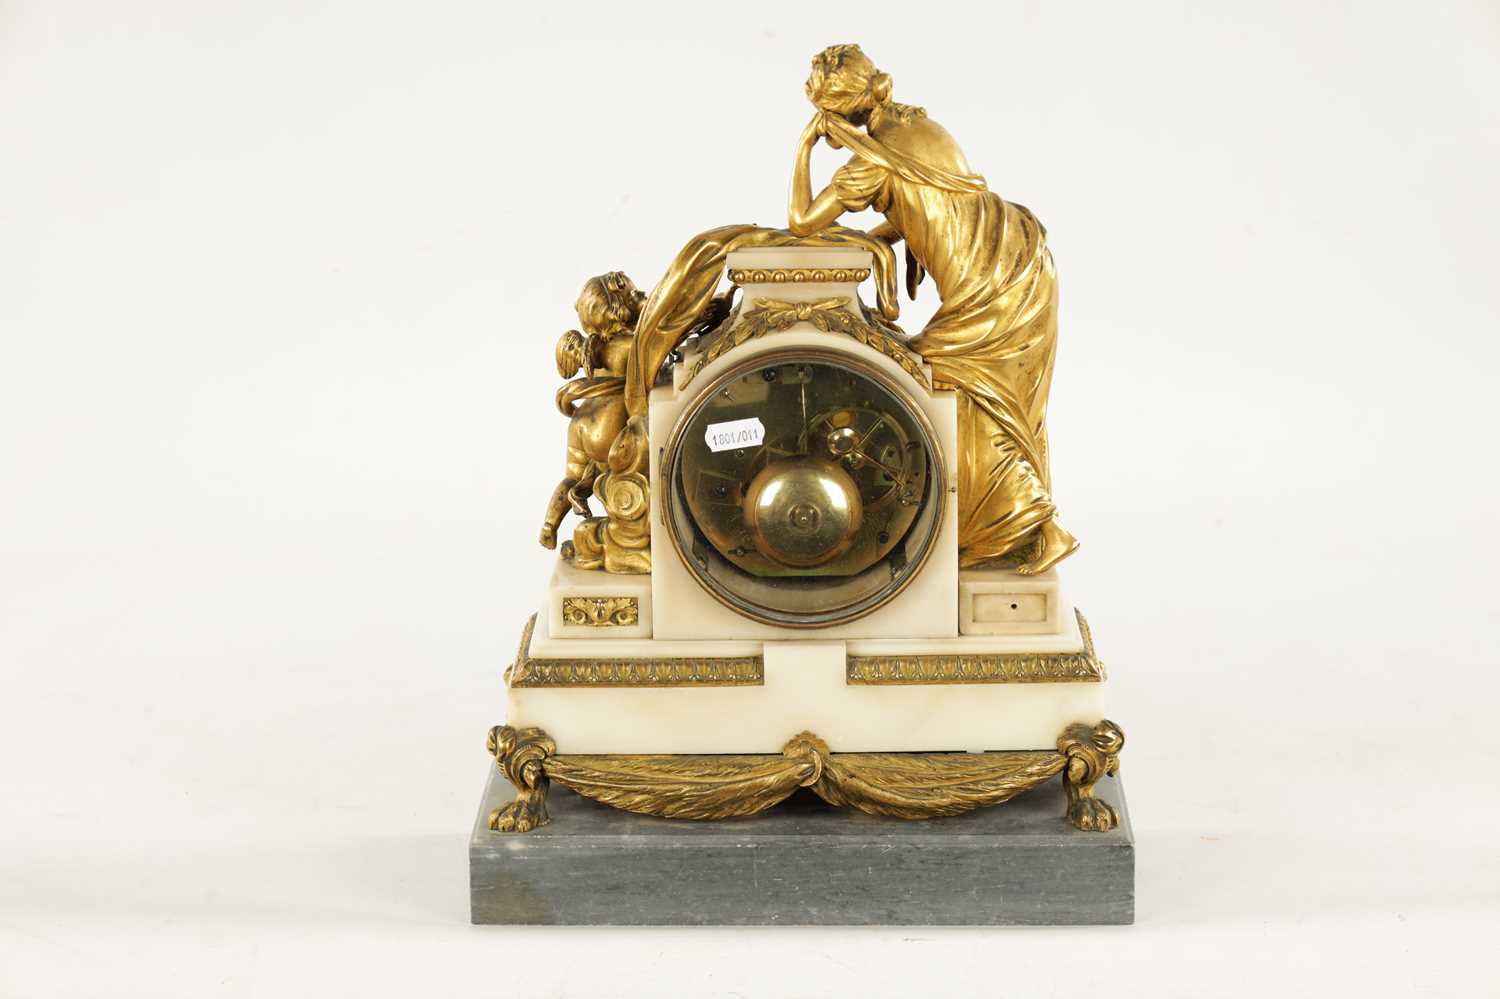 CHARLES LEROY, A PARIS. A FRENCH LOUIS XVI ORMOLU AND MARBLE FIGURAL MANTEL CLOCK - Image 8 of 11